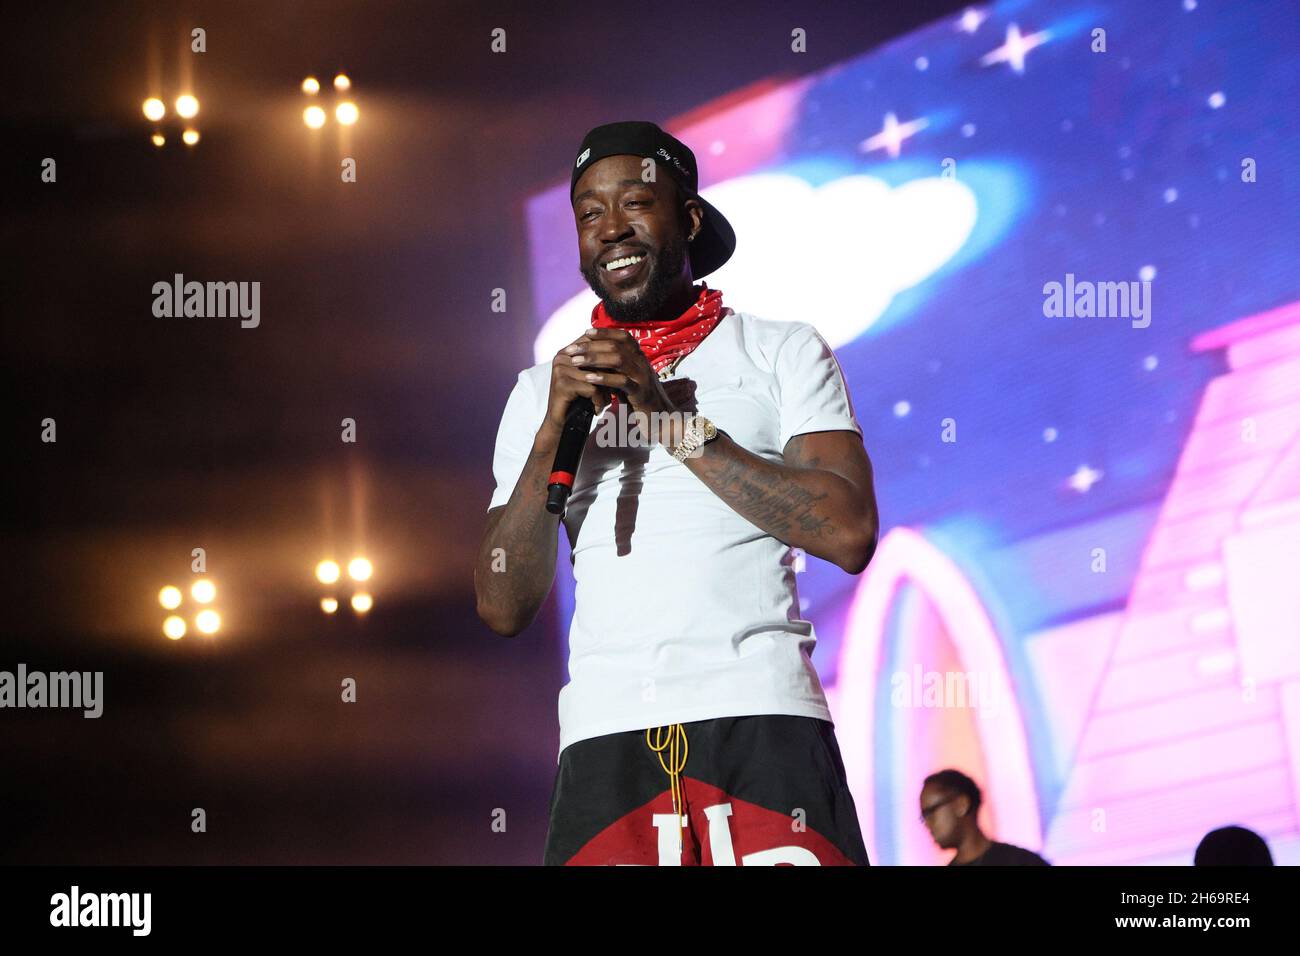 Las Vegas, United States. 14th Nov, 2021. Musical artist Freddie Gibbs performs on stage during the Day N Vegas Music Festival at the Las Vegas Festival Grounds in Las Vegas, Nevada on Saturday, November 13, 2021. Photo by James Atoa/UPI Credit: UPI/Alamy Live News Stock Photo